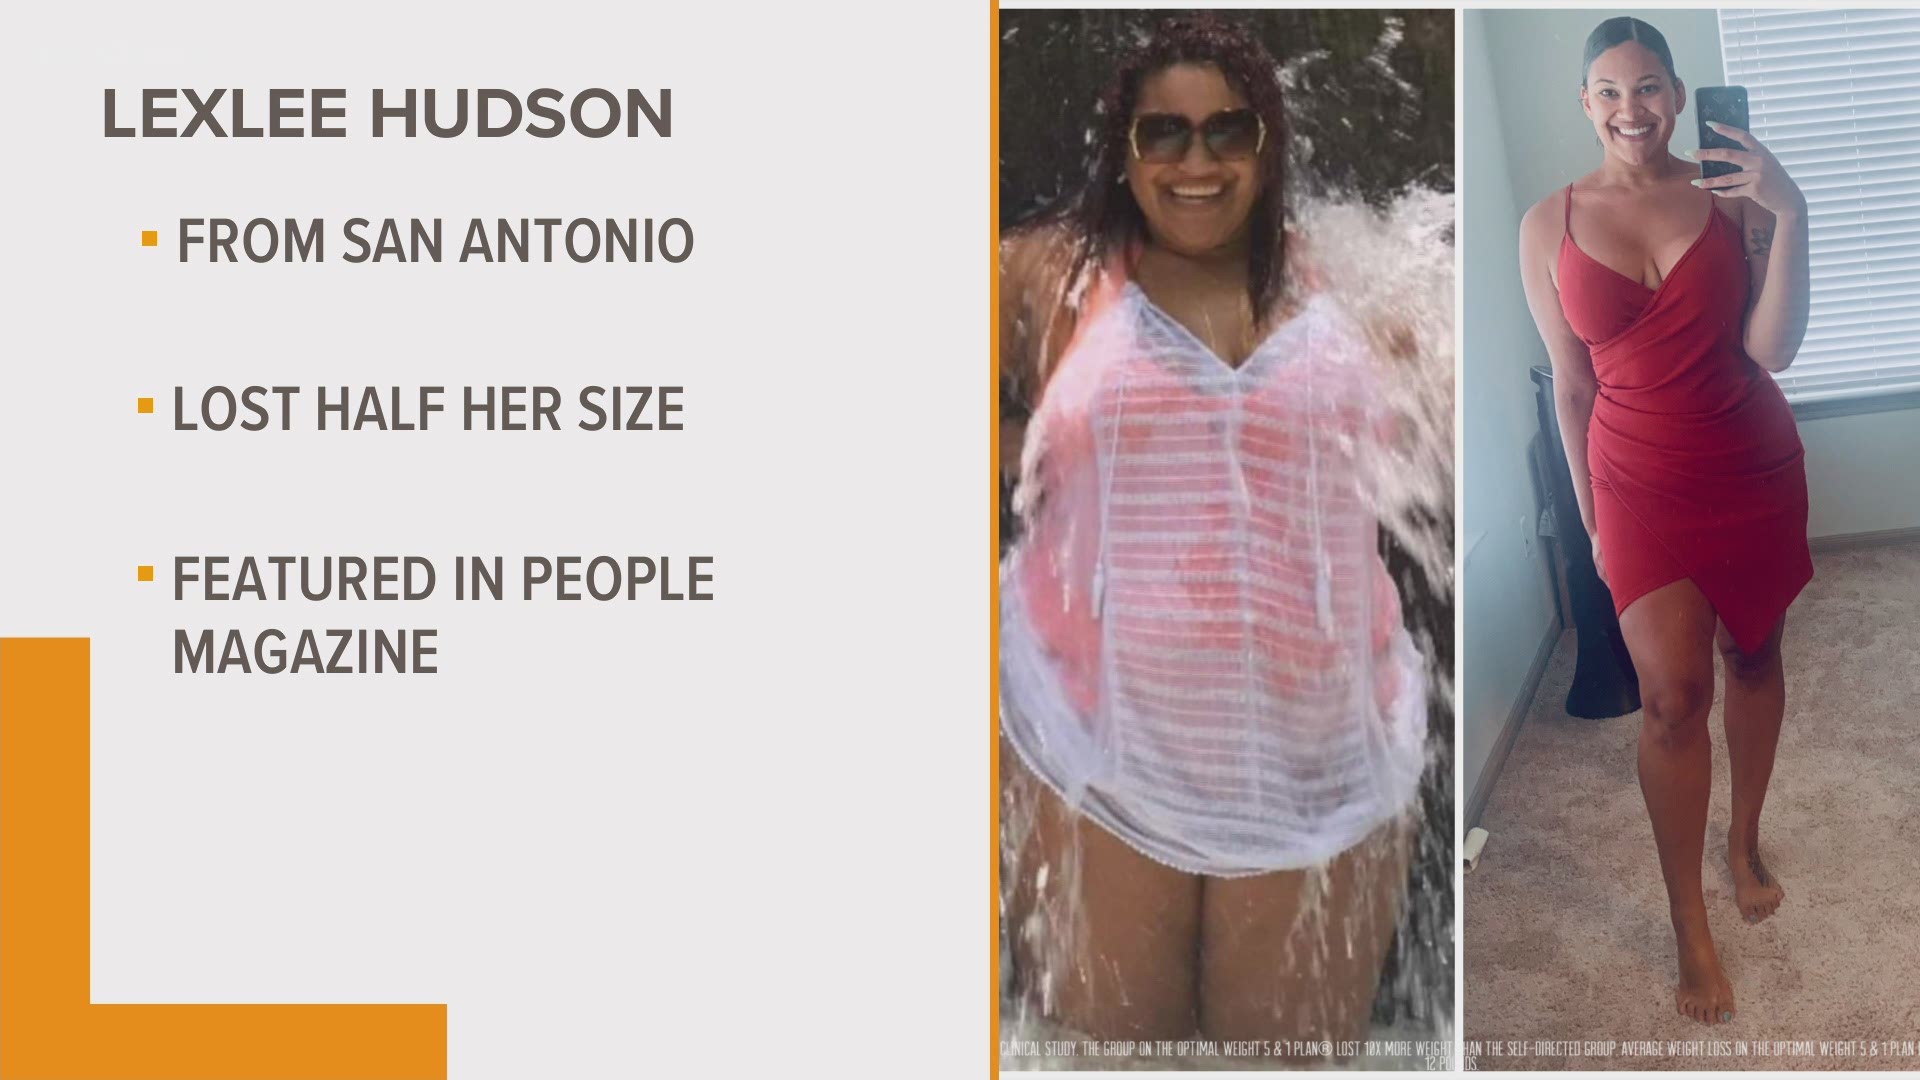 People magazine featured Lexlee Hudson in their annual "Half Their Size" issue. The now 25-year-old shared some inspirational advice for others on a similar journey.